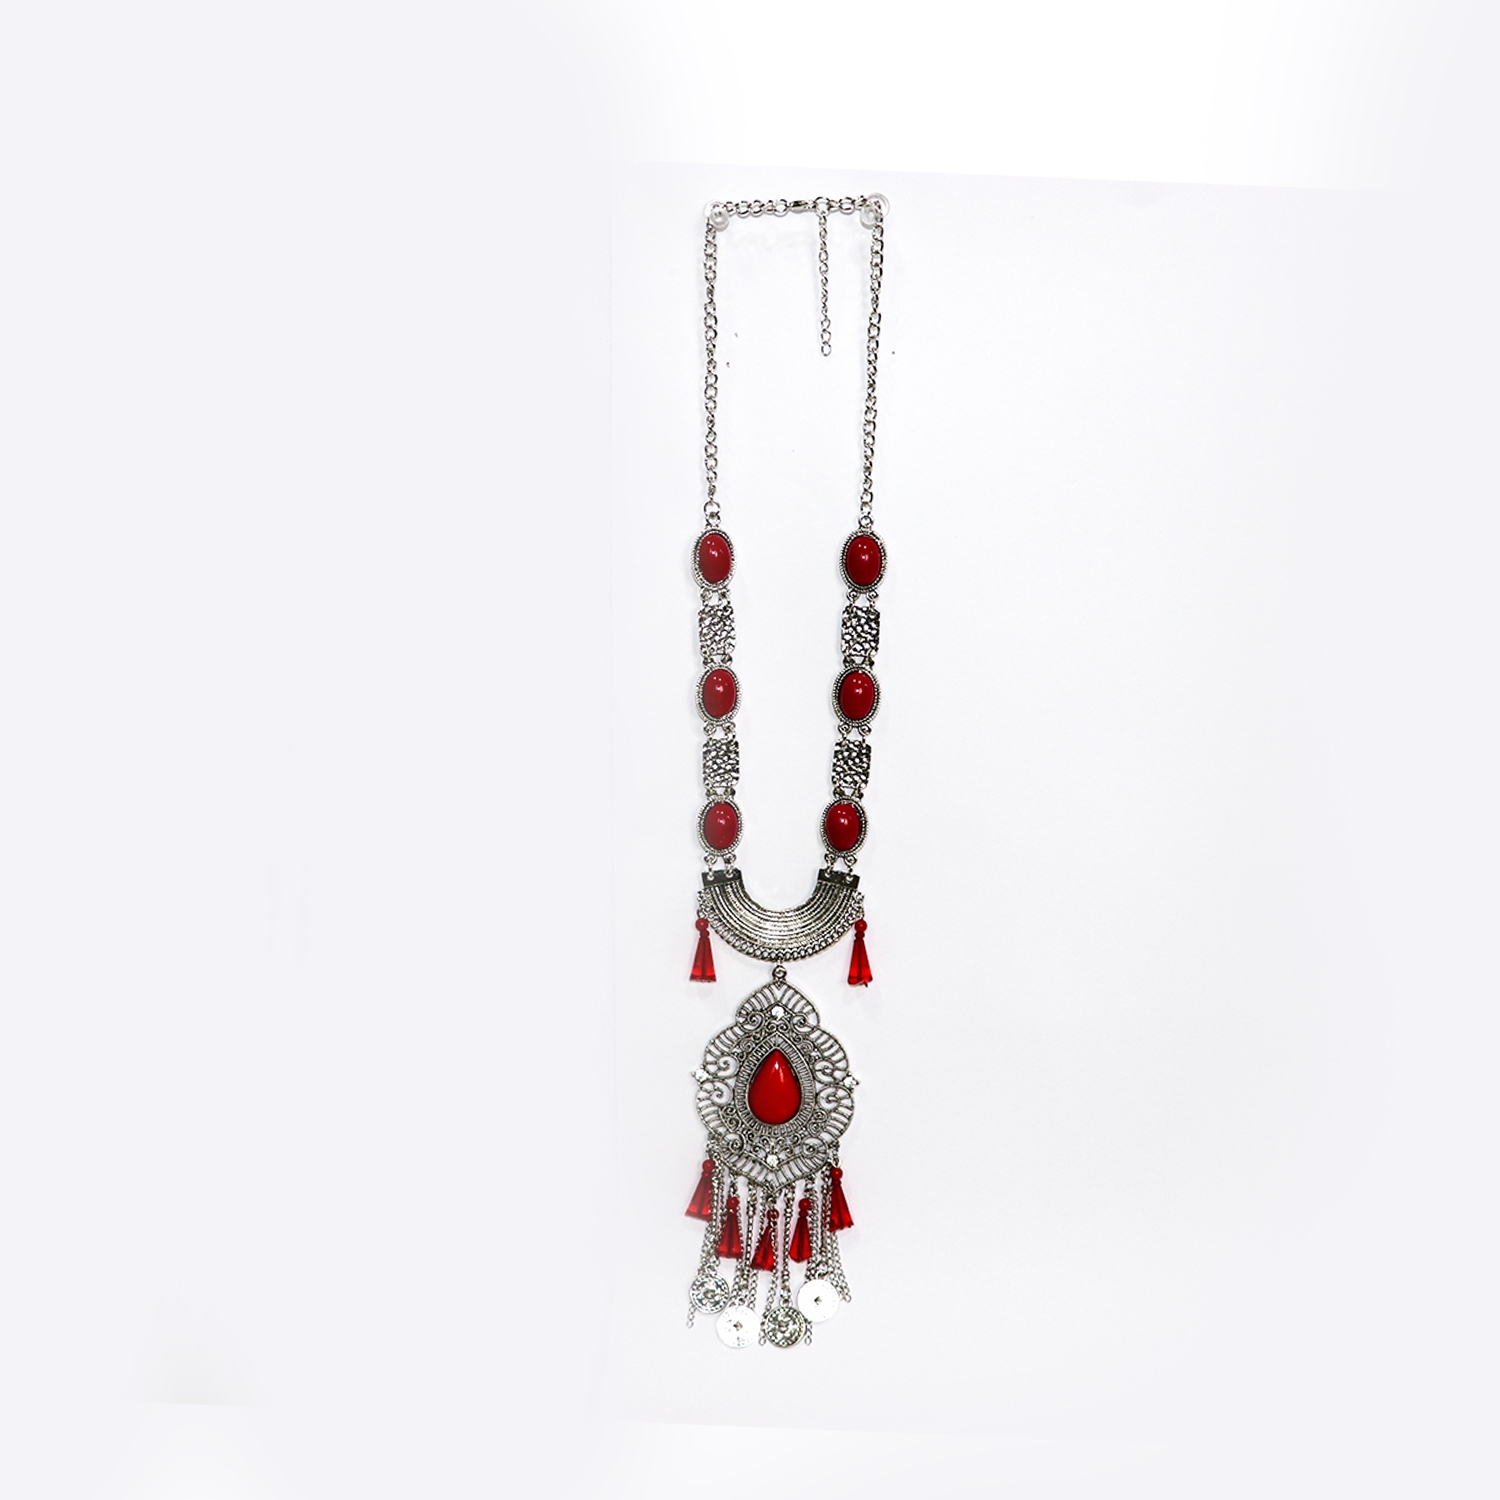 EMM | EMM's Red Necklace For Women And Girls